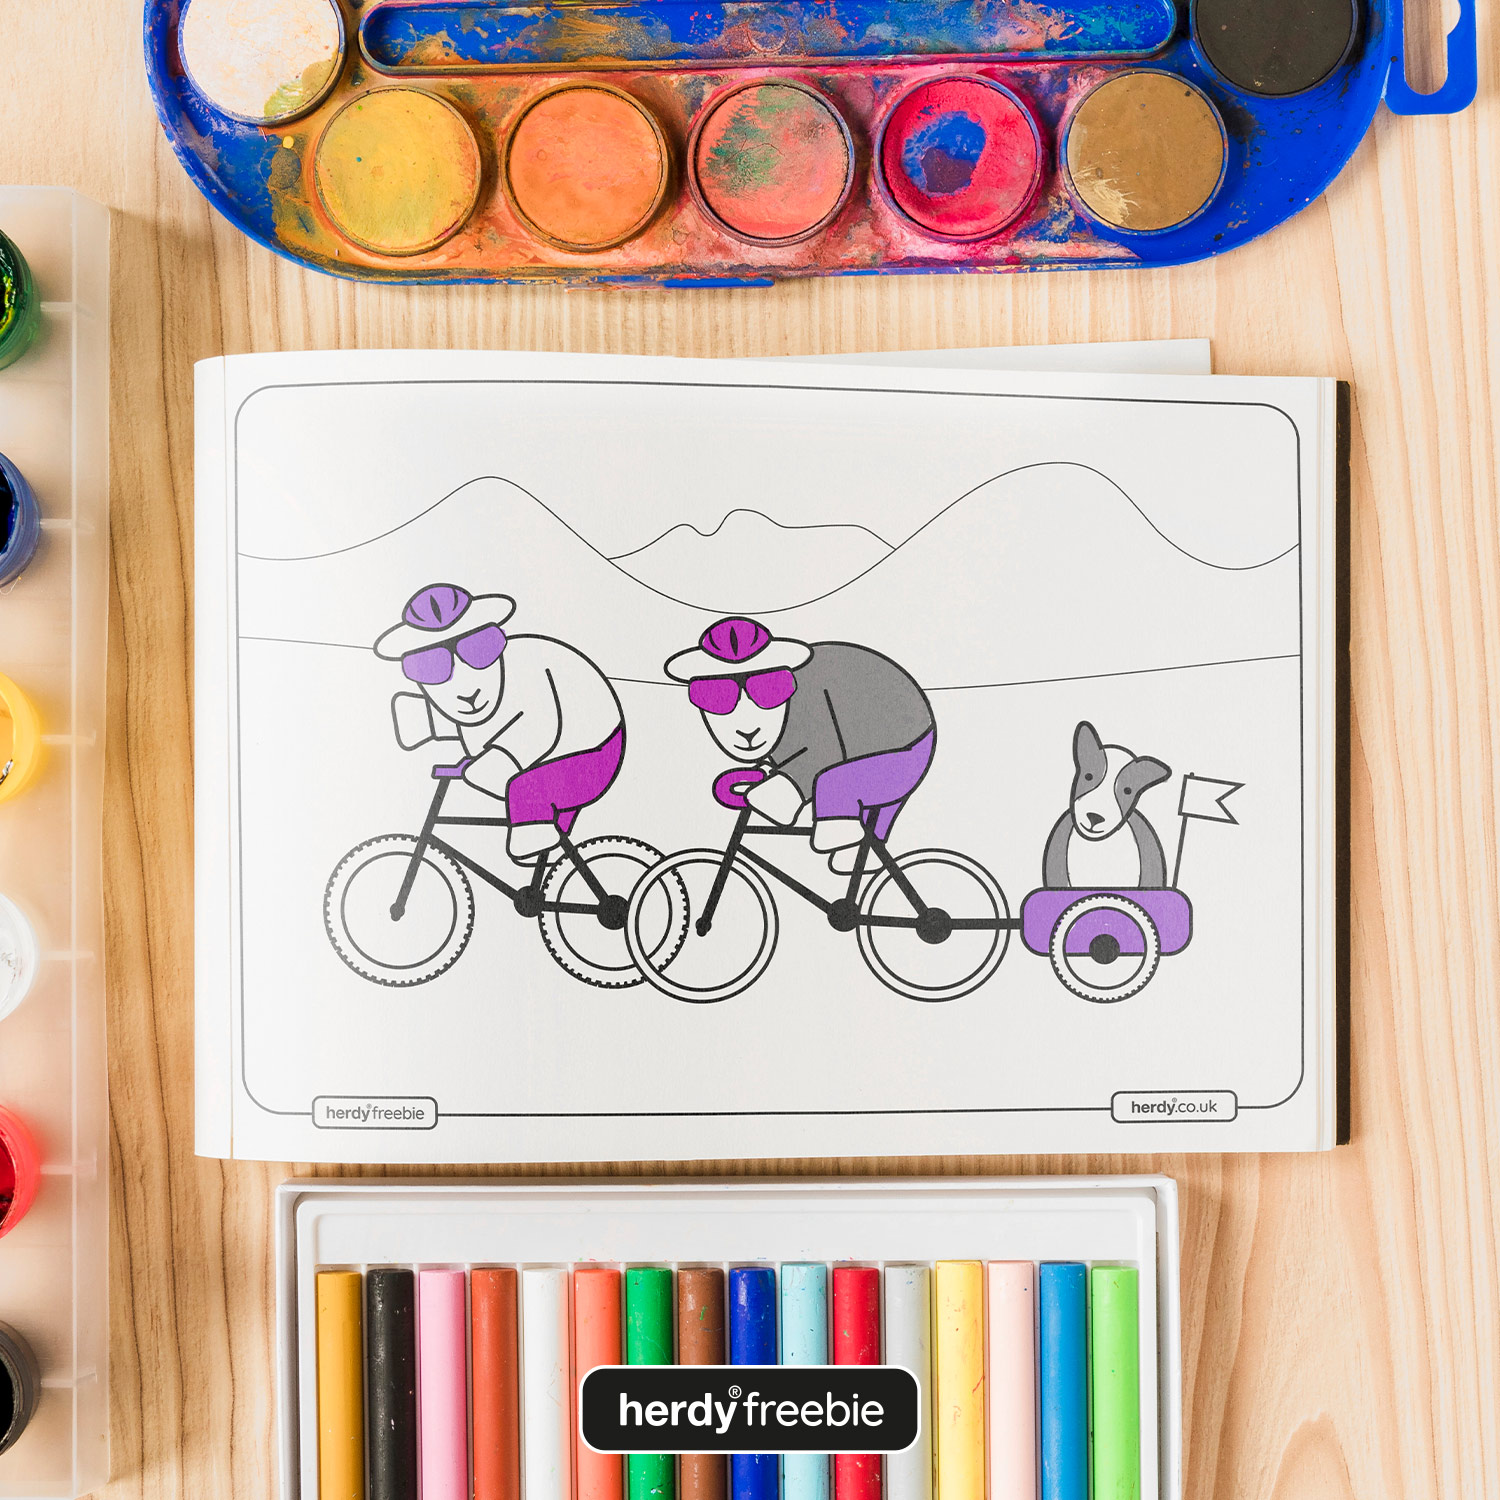 Herdy free coloring in download: image shows Herdy and Sheppy Cycling in The Lake District